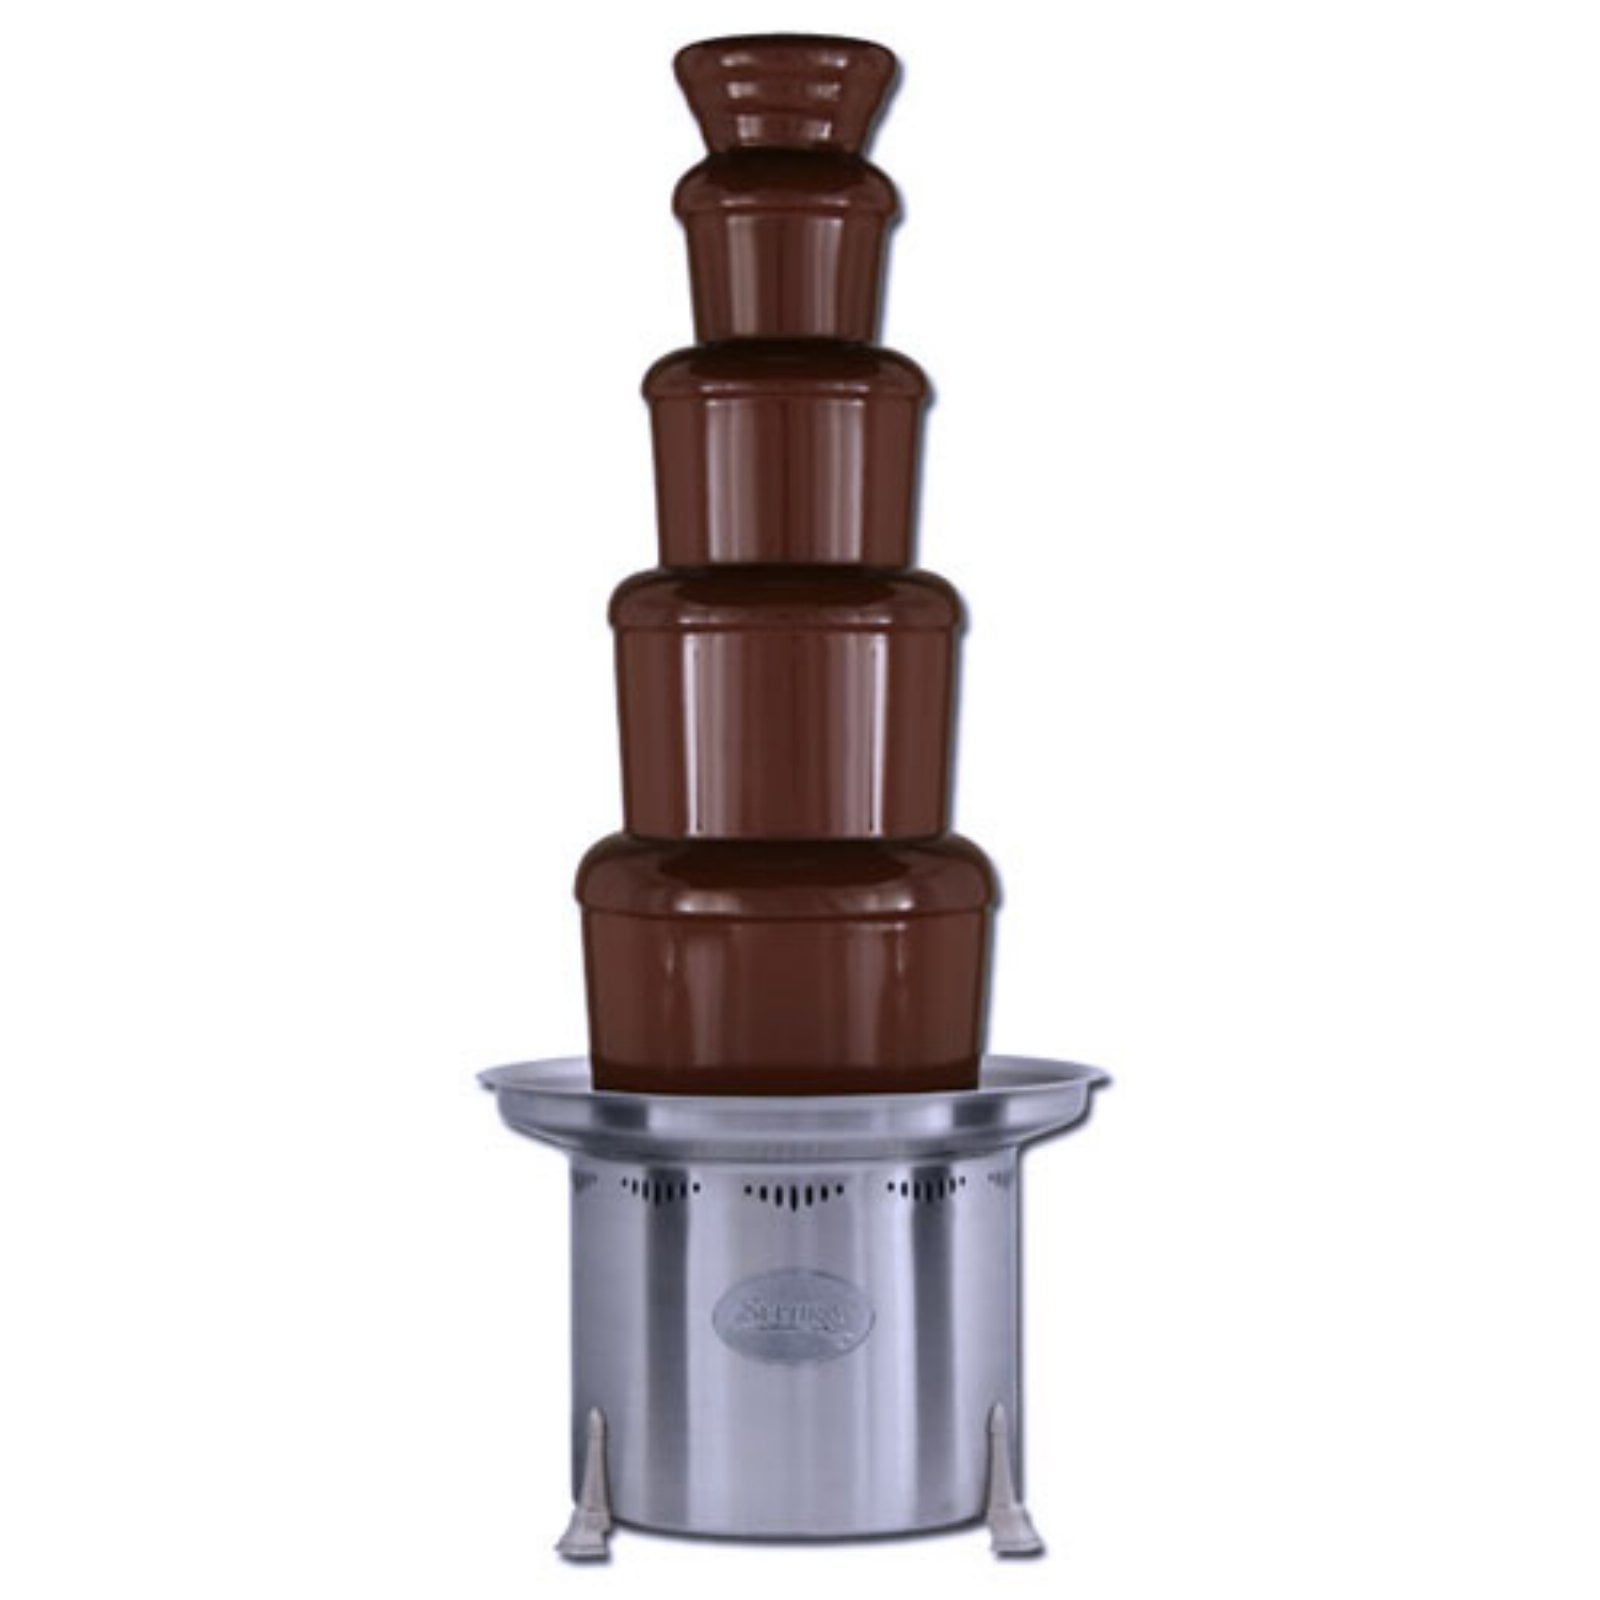 H 820mm stainless commercial chocolate fountains Chocolate fountain 6 tiers